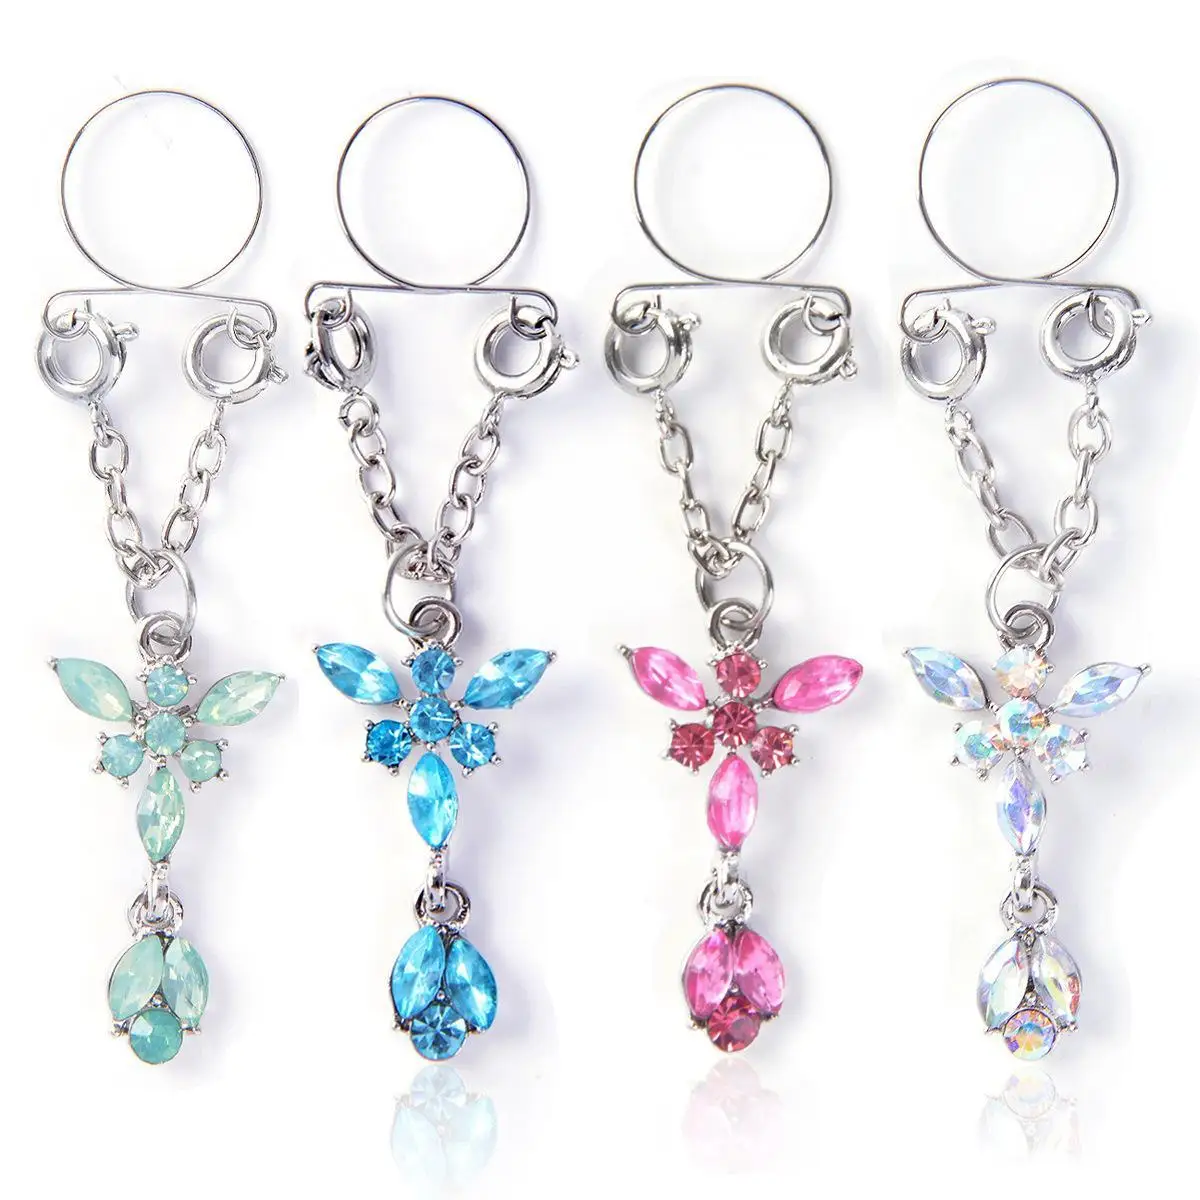 1pc Sexy Crystal Butterfly Pendant Nipple Ring Dangle Pierced Piercing Jewelry Body Clip Nipple Ring Non Shiny F7Y1